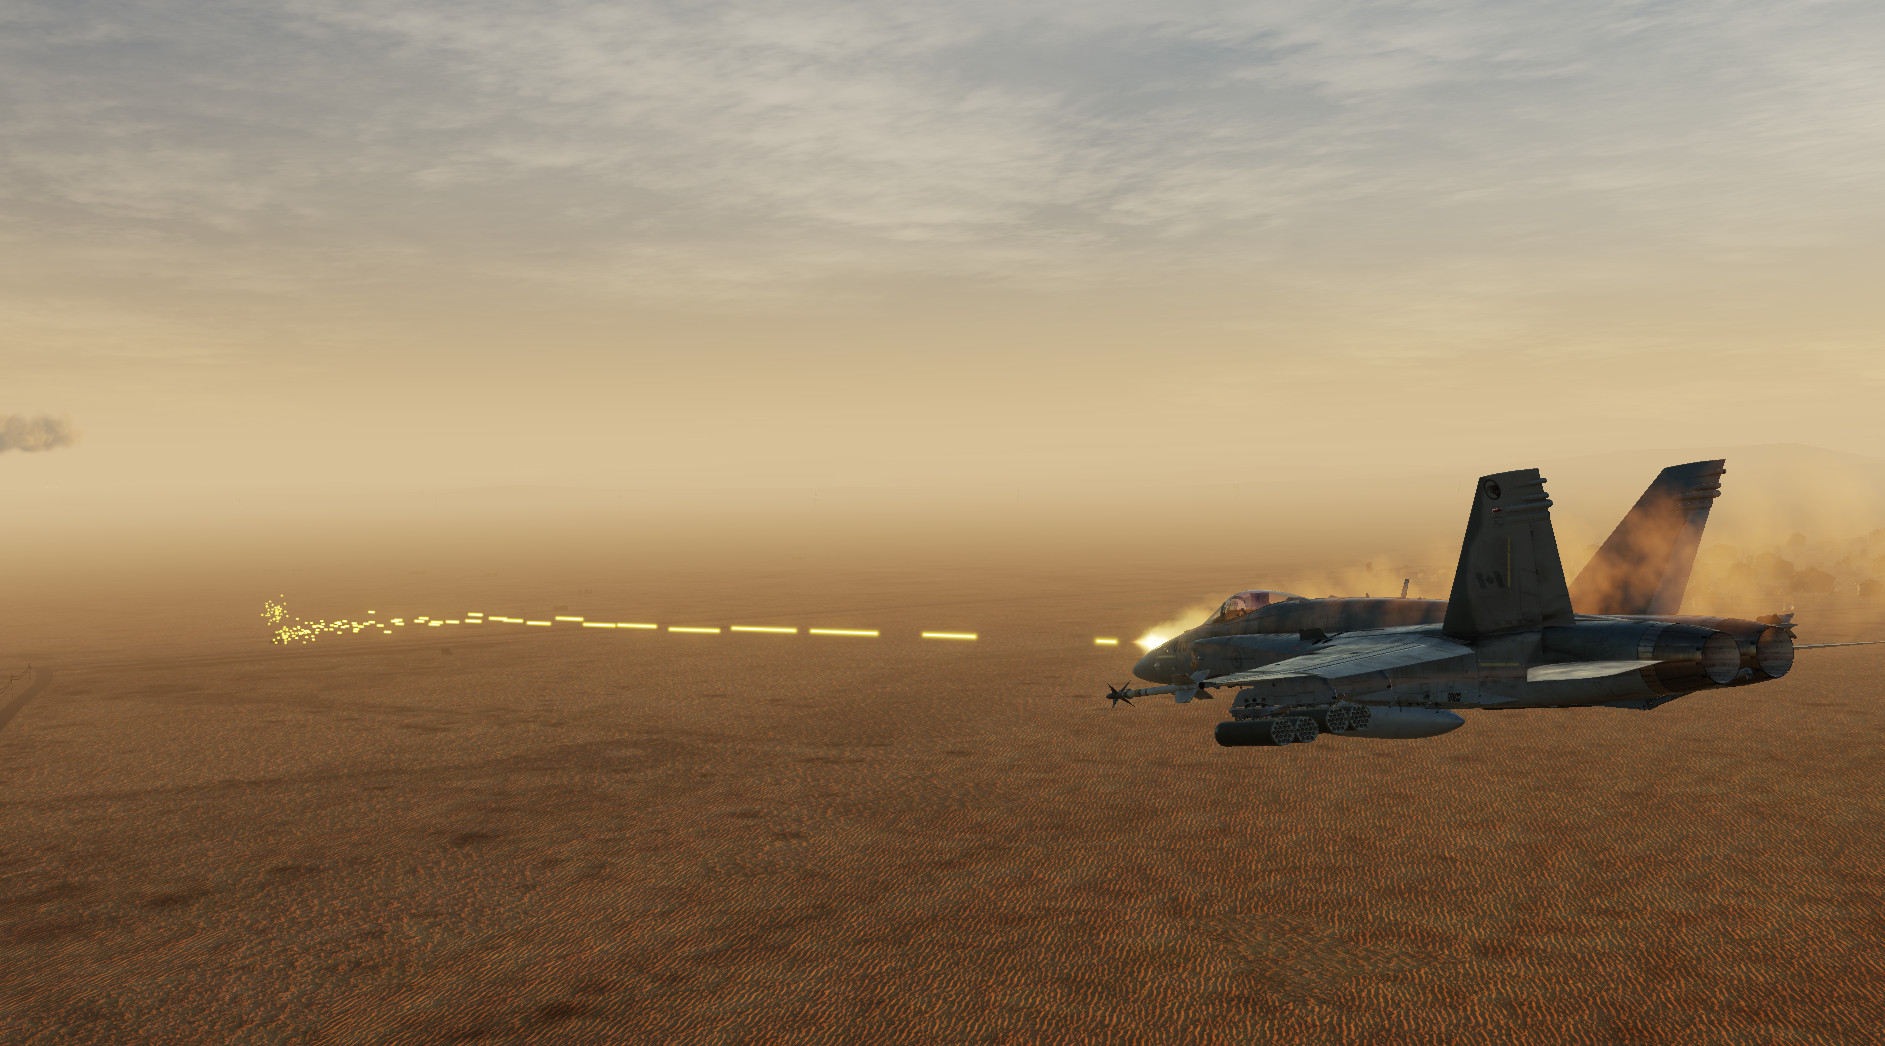 Flight of the Phoenix (Supercarrier edition)